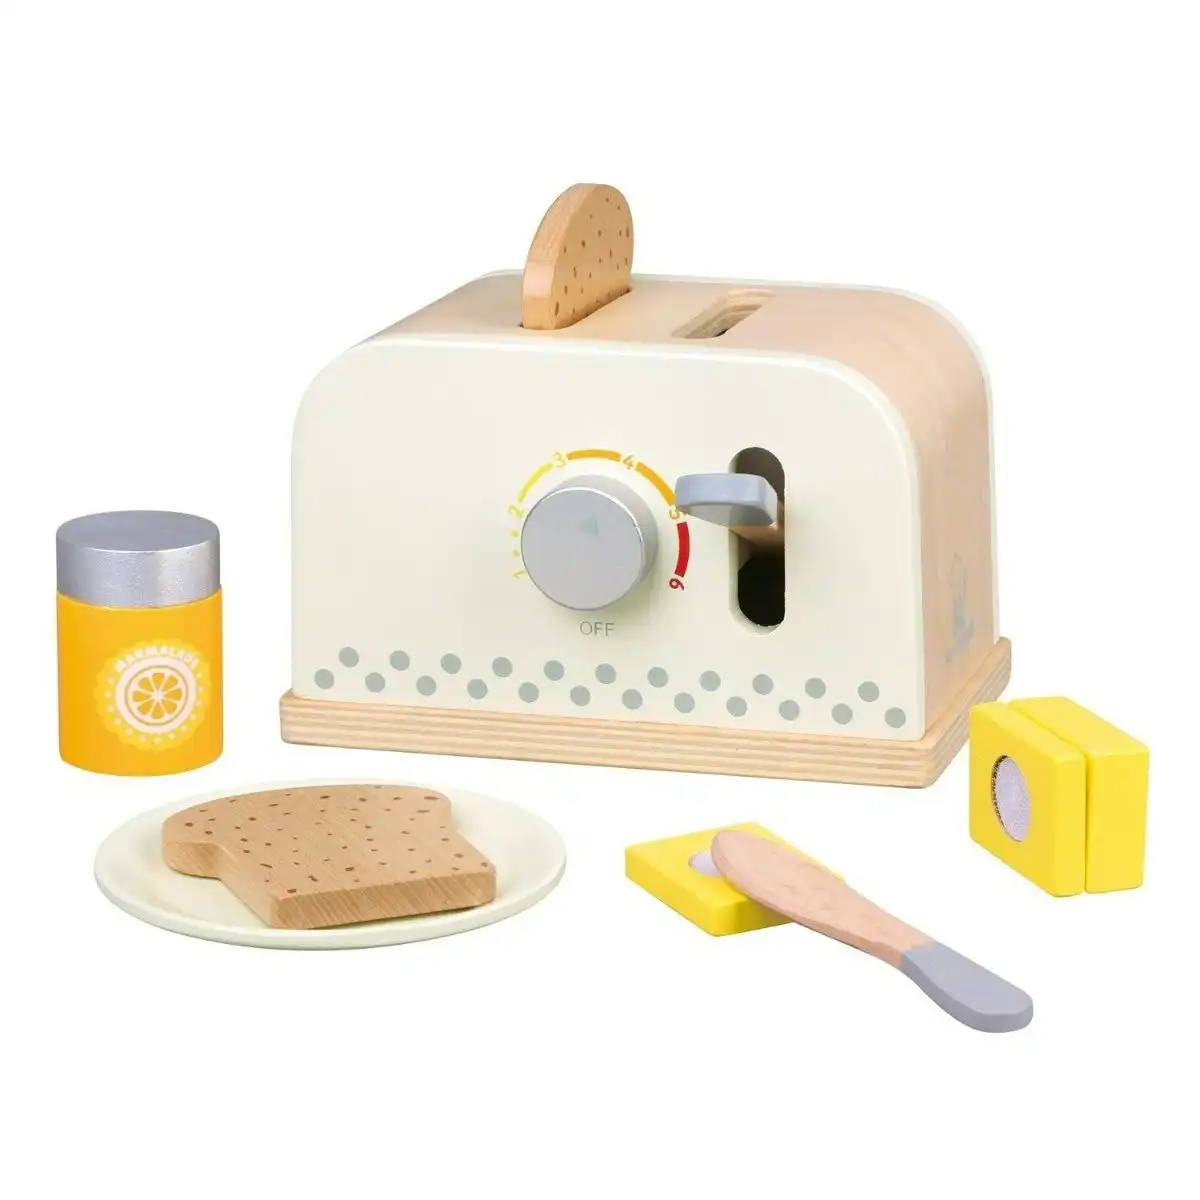 New Classic Toys Pop-up Toaster - White